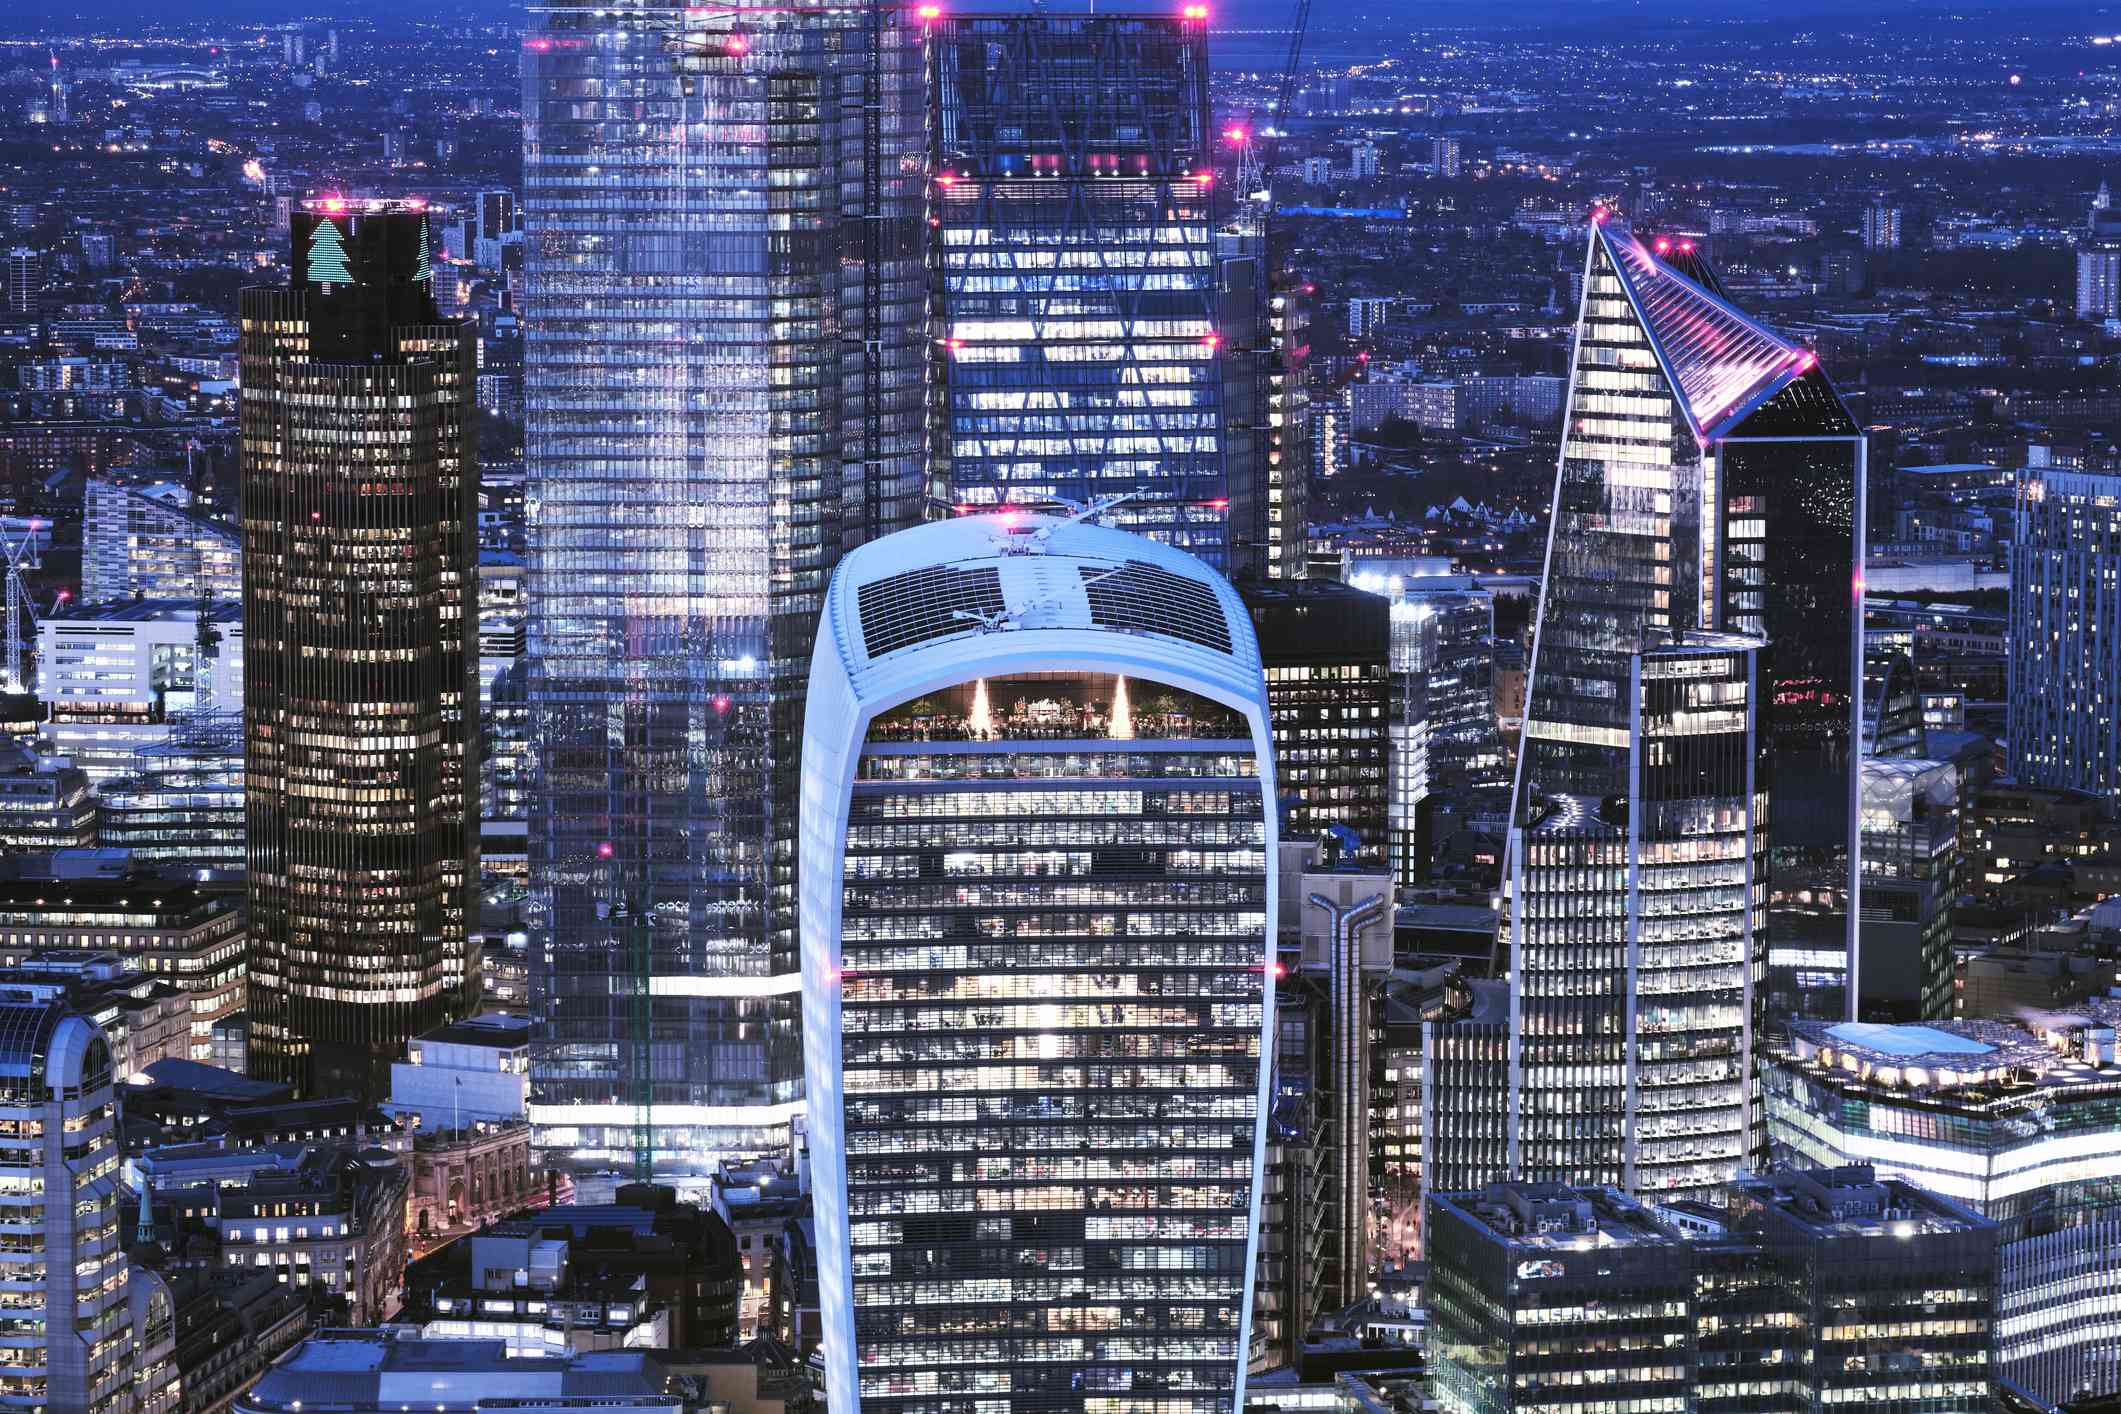 Bird's eye view of London financial district at night